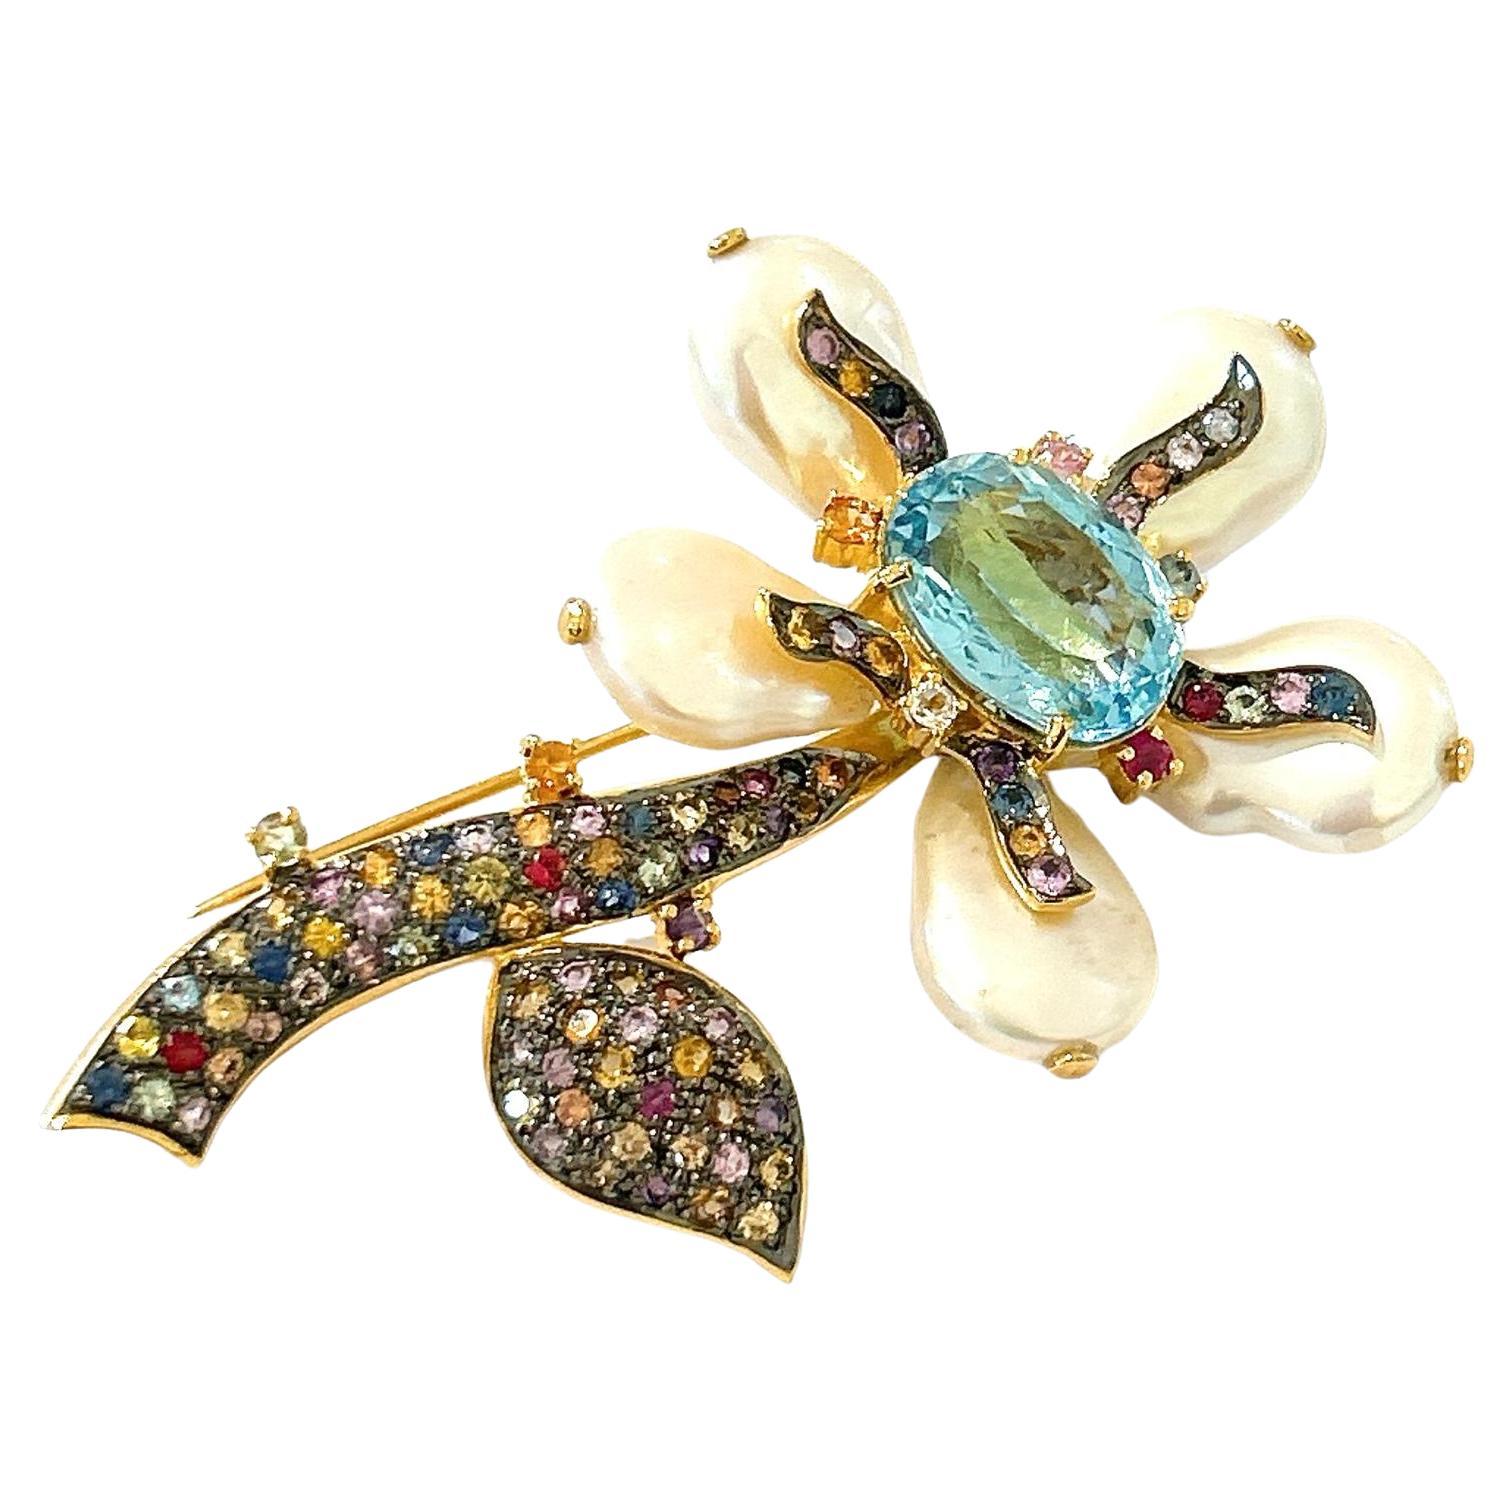 Bochic “Orient” Pearl, Multi Sapphires & Topaz Brooch Set In 18K Gold & Silver 
Can be worn as a brooch and a pendant 

Natural Blue Topaz   - 4 carat 
Multi color Natural Sapphires from Sri Lanka 3 carat
Natural South Sea Pearls 


The Brooch is